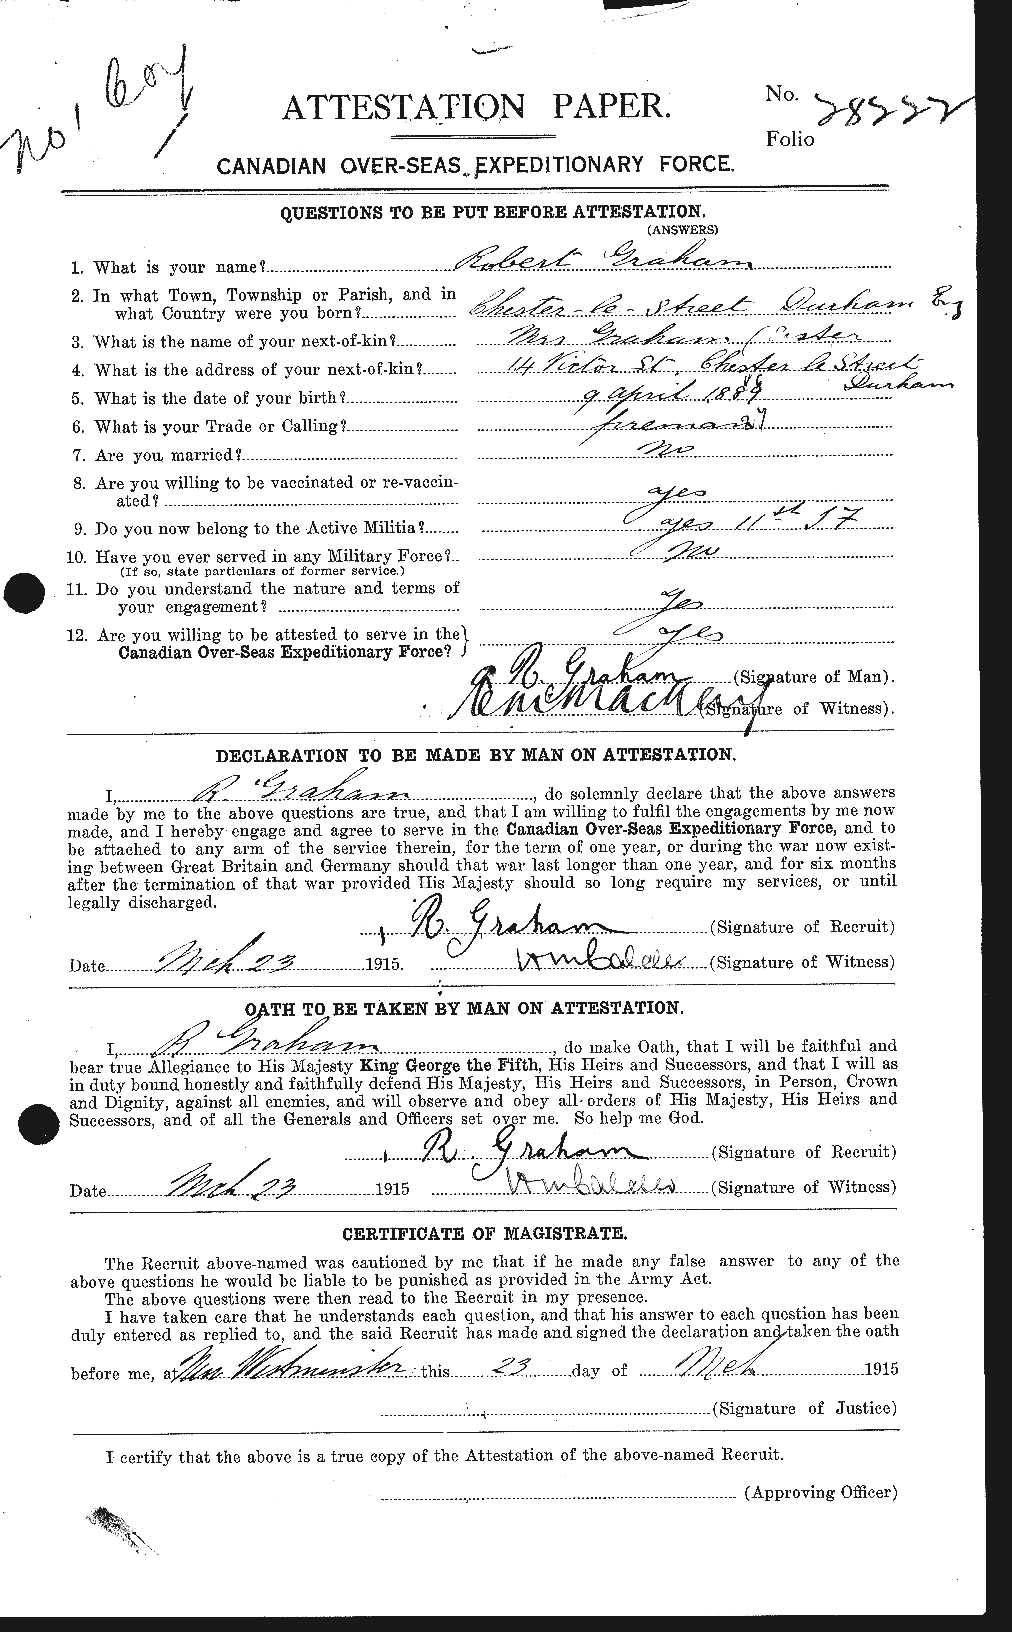 Personnel Records of the First World War - CEF 359373a